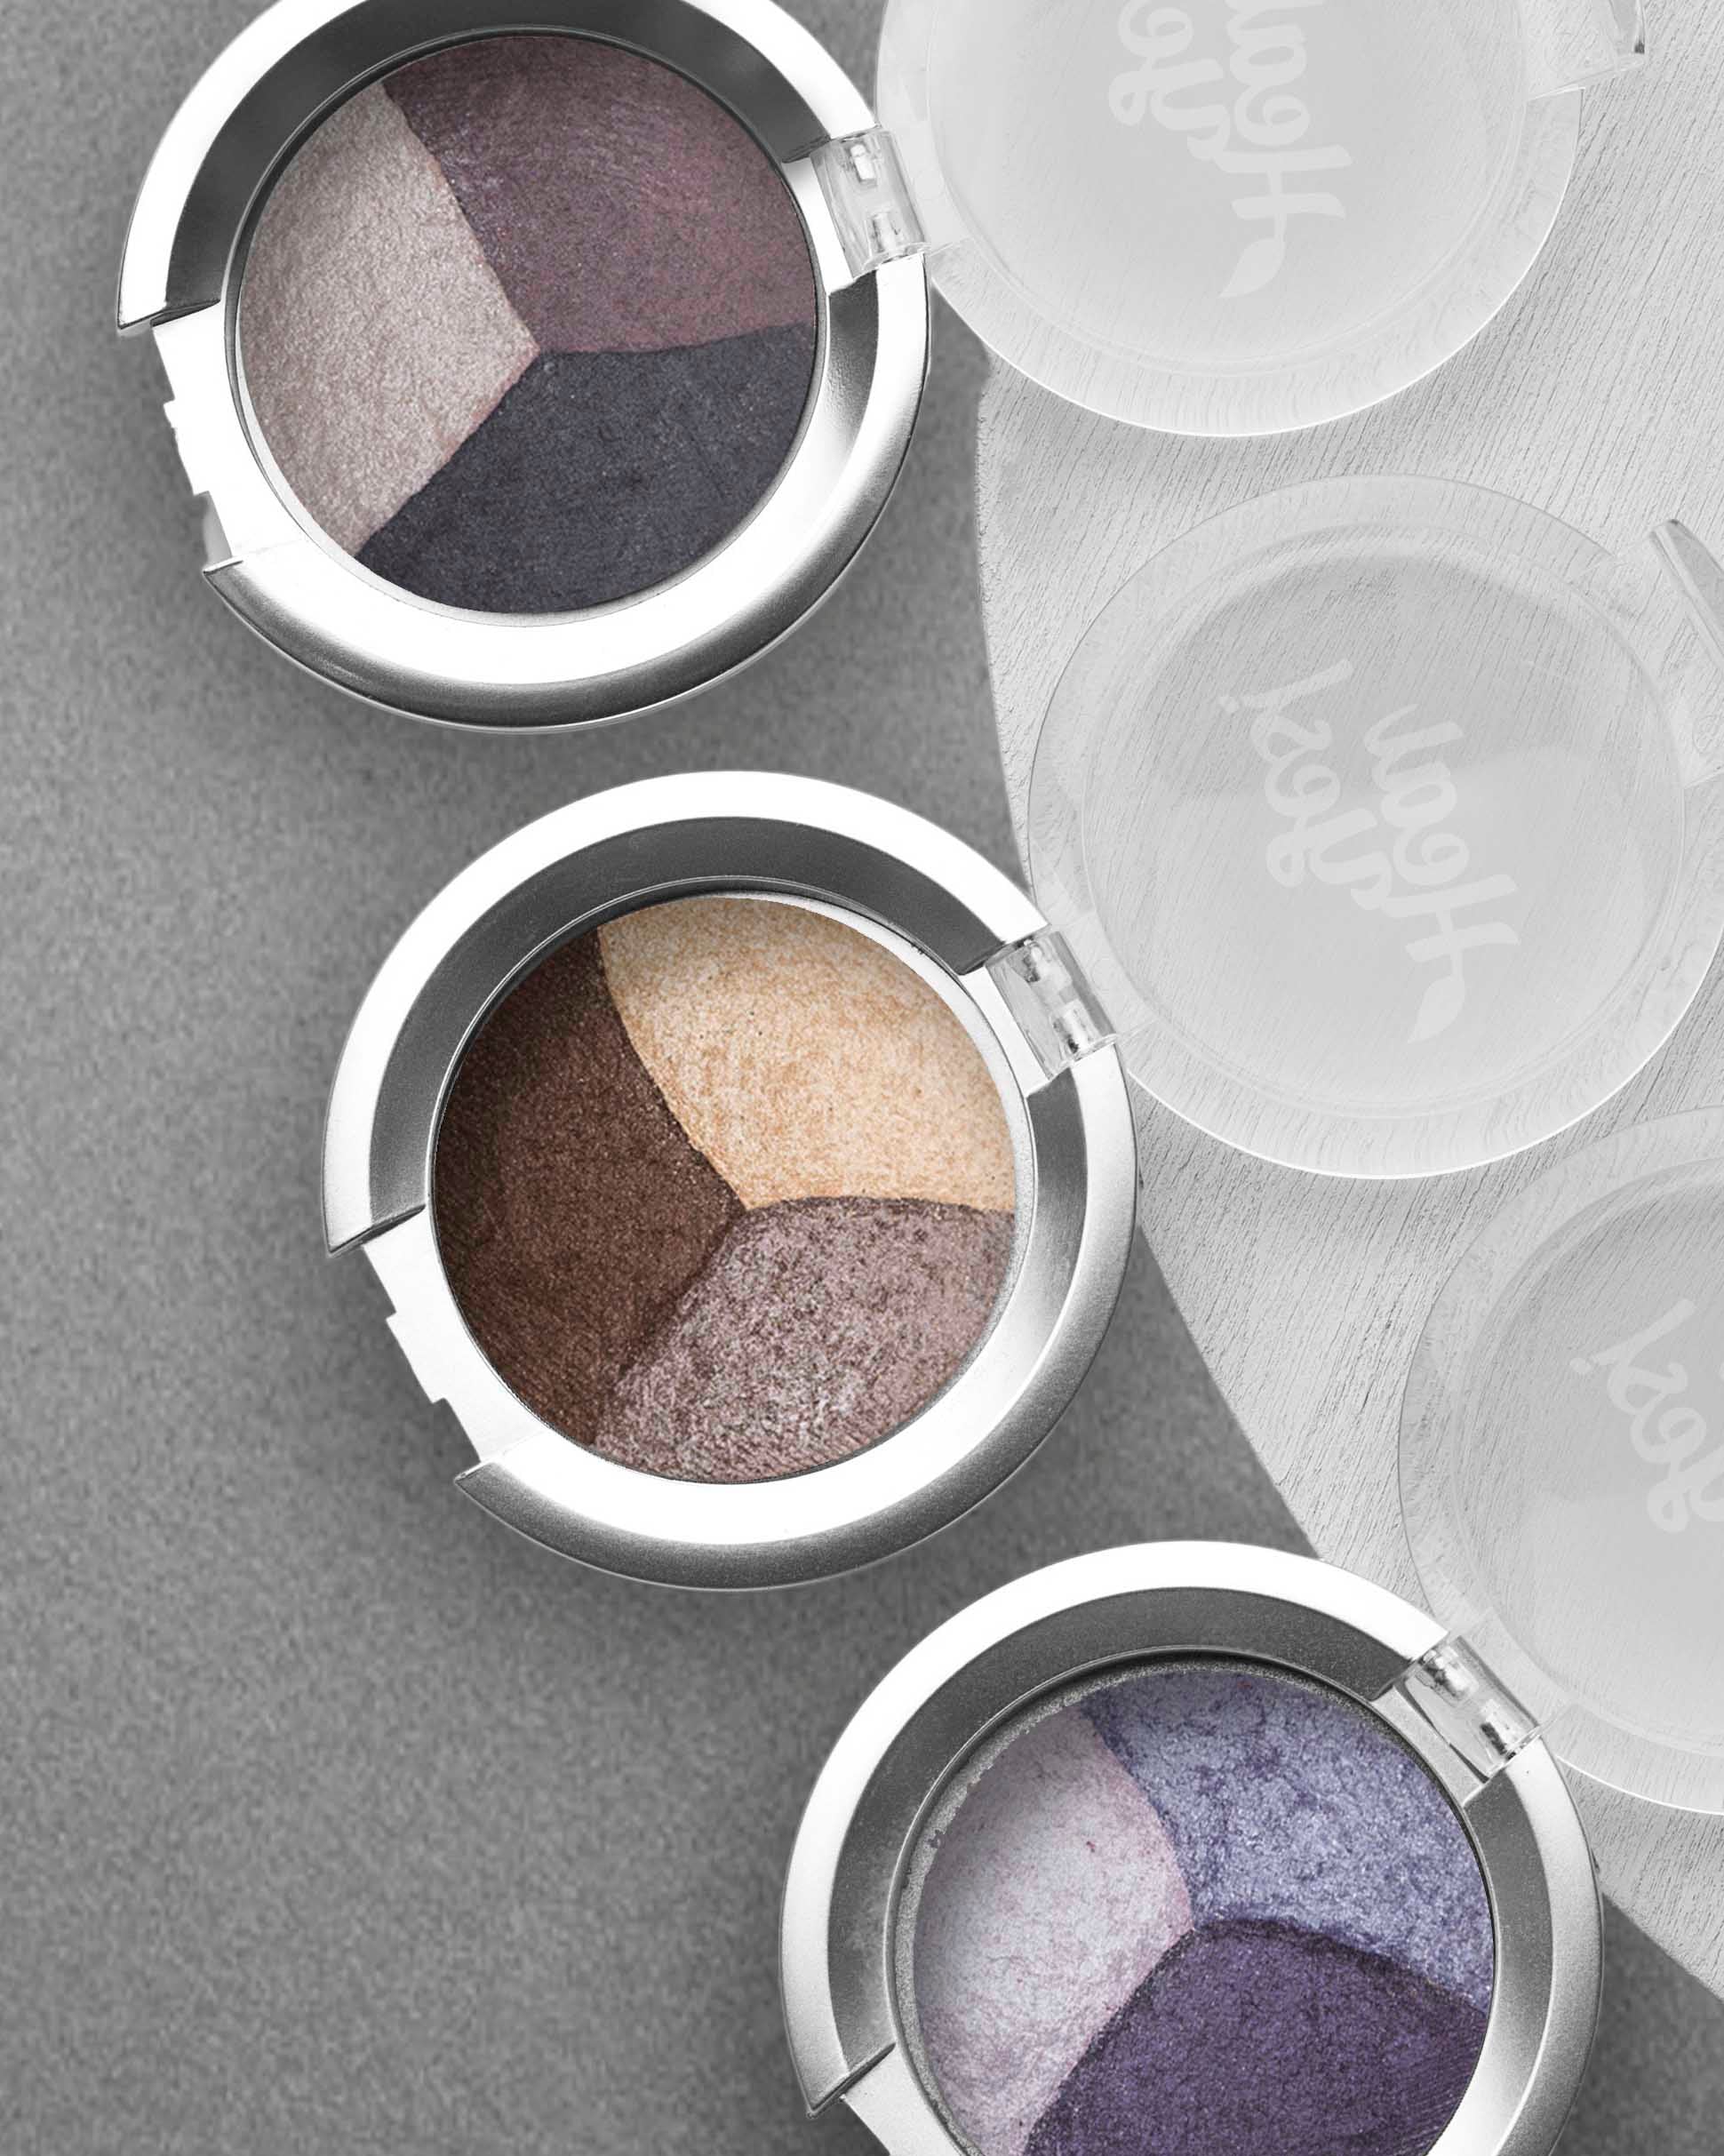 Long-Lasting Pressed Mineral Eyeshadow Trios - Talc-Free, Gluten-Free, + Much More!